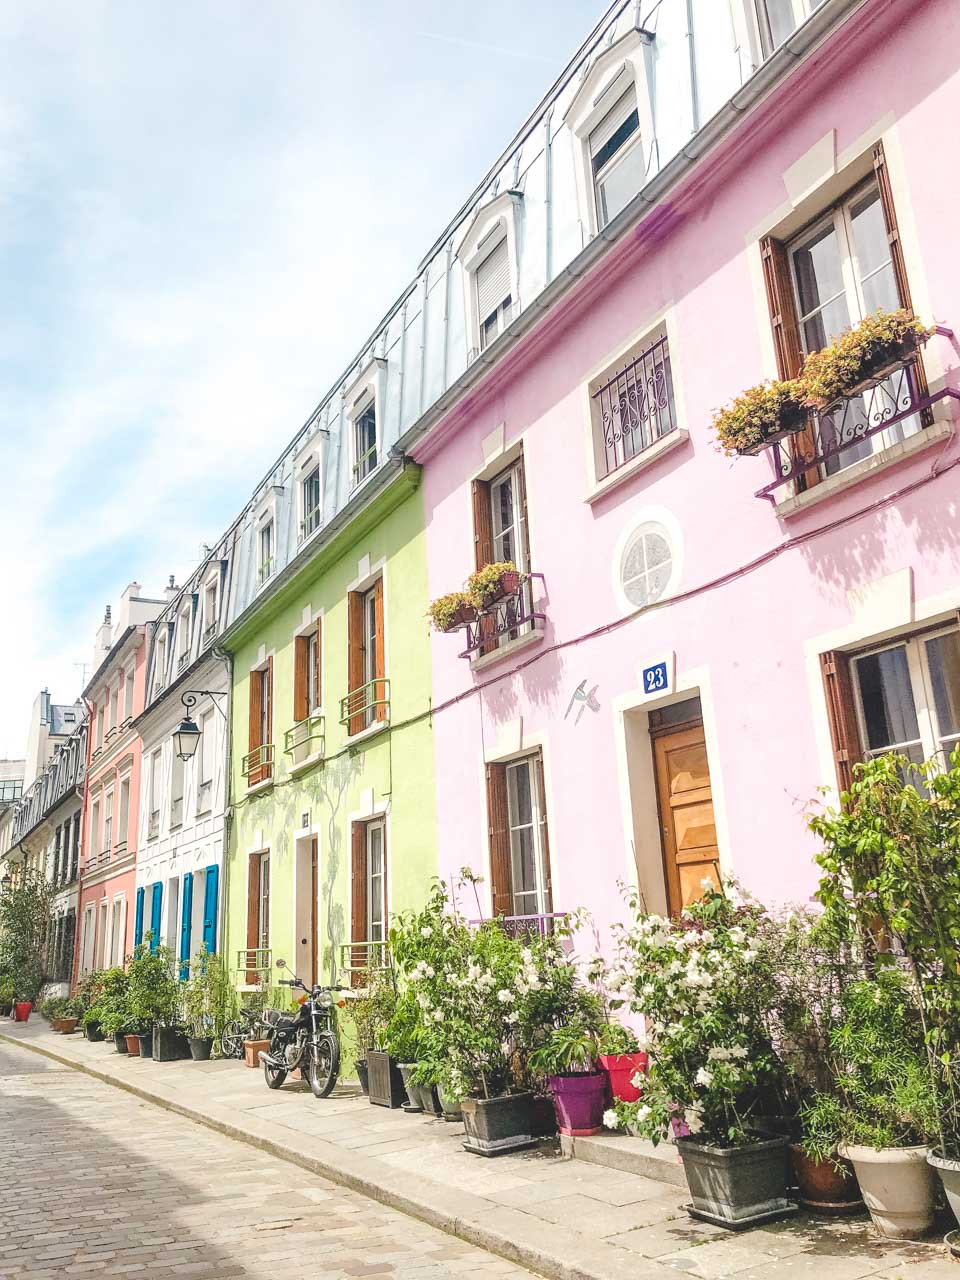 Rue Crémieux in Paris, France - a pedestrian street lined with pastel-coloured houses